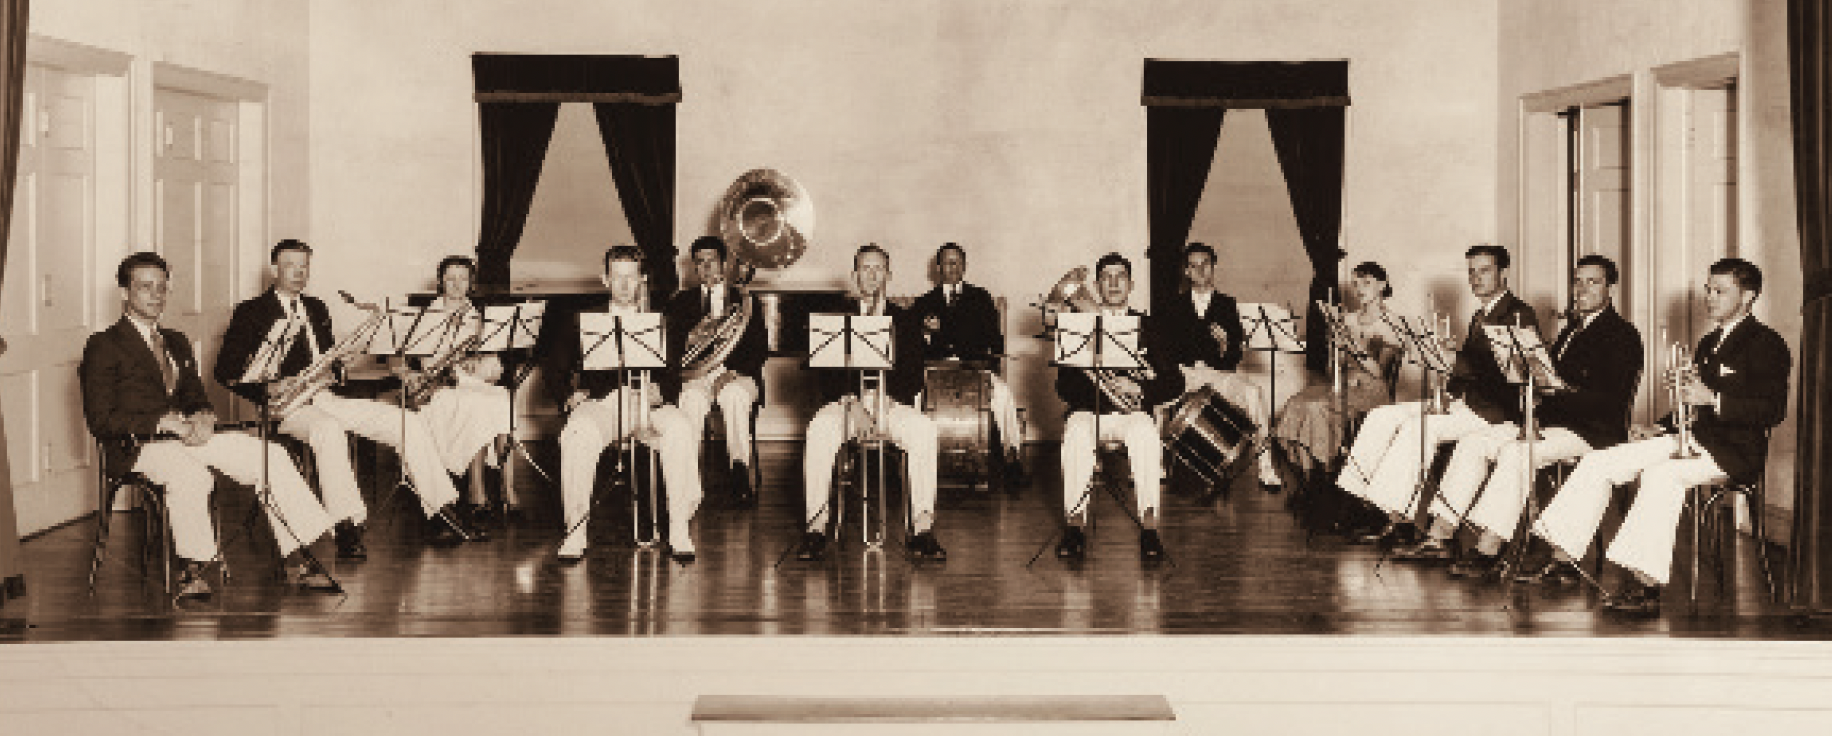 King College Band on the Chapel stage, 1932-1933 | History of King University